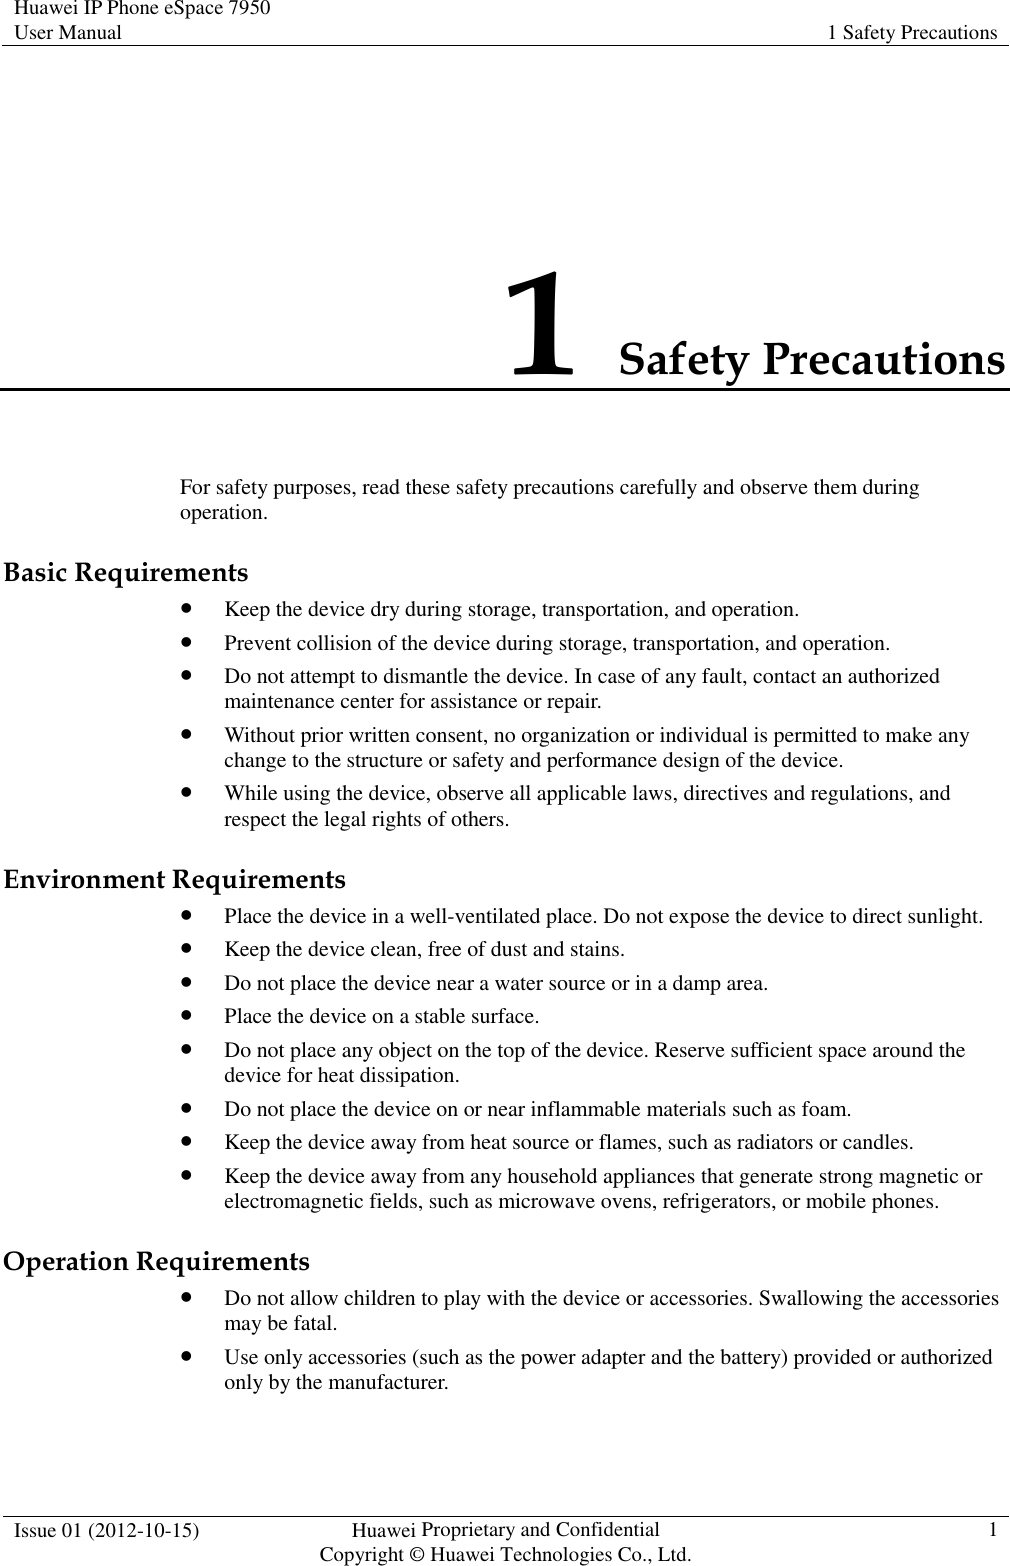 Huawei IP Phone eSpace 7950 User Manual  1 Safety Precautions  Issue 01 (2012-10-15)  Huawei Proprietary and Confidential                                     Copyright © Huawei Technologies Co., Ltd.  1  1 Safety Precautions For safety purposes, read these safety precautions carefully and observe them during operation. Basic Requirements  Keep the device dry during storage, transportation, and operation.  Prevent collision of the device during storage, transportation, and operation.  Do not attempt to dismantle the device. In case of any fault, contact an authorized maintenance center for assistance or repair.  Without prior written consent, no organization or individual is permitted to make any change to the structure or safety and performance design of the device.  While using the device, observe all applicable laws, directives and regulations, and respect the legal rights of others. Environment Requirements  Place the device in a well-ventilated place. Do not expose the device to direct sunlight.  Keep the device clean, free of dust and stains.  Do not place the device near a water source or in a damp area.  Place the device on a stable surface.  Do not place any object on the top of the device. Reserve sufficient space around the device for heat dissipation.  Do not place the device on or near inflammable materials such as foam.  Keep the device away from heat source or flames, such as radiators or candles.  Keep the device away from any household appliances that generate strong magnetic or electromagnetic fields, such as microwave ovens, refrigerators, or mobile phones. Operation Requirements  Do not allow children to play with the device or accessories. Swallowing the accessories may be fatal.  Use only accessories (such as the power adapter and the battery) provided or authorized only by the manufacturer. 